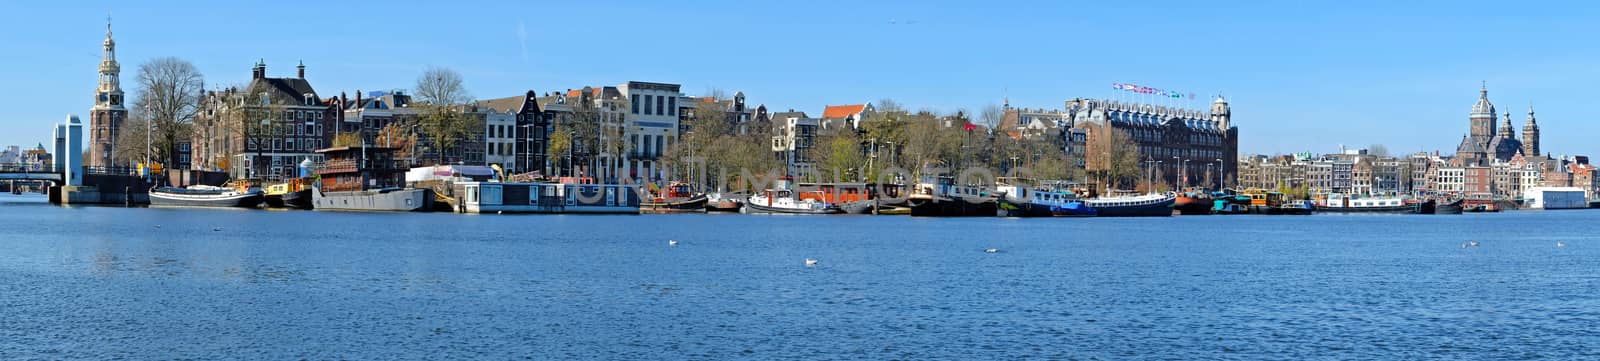 Panorama from the city Amsterdam in the Netherlands 